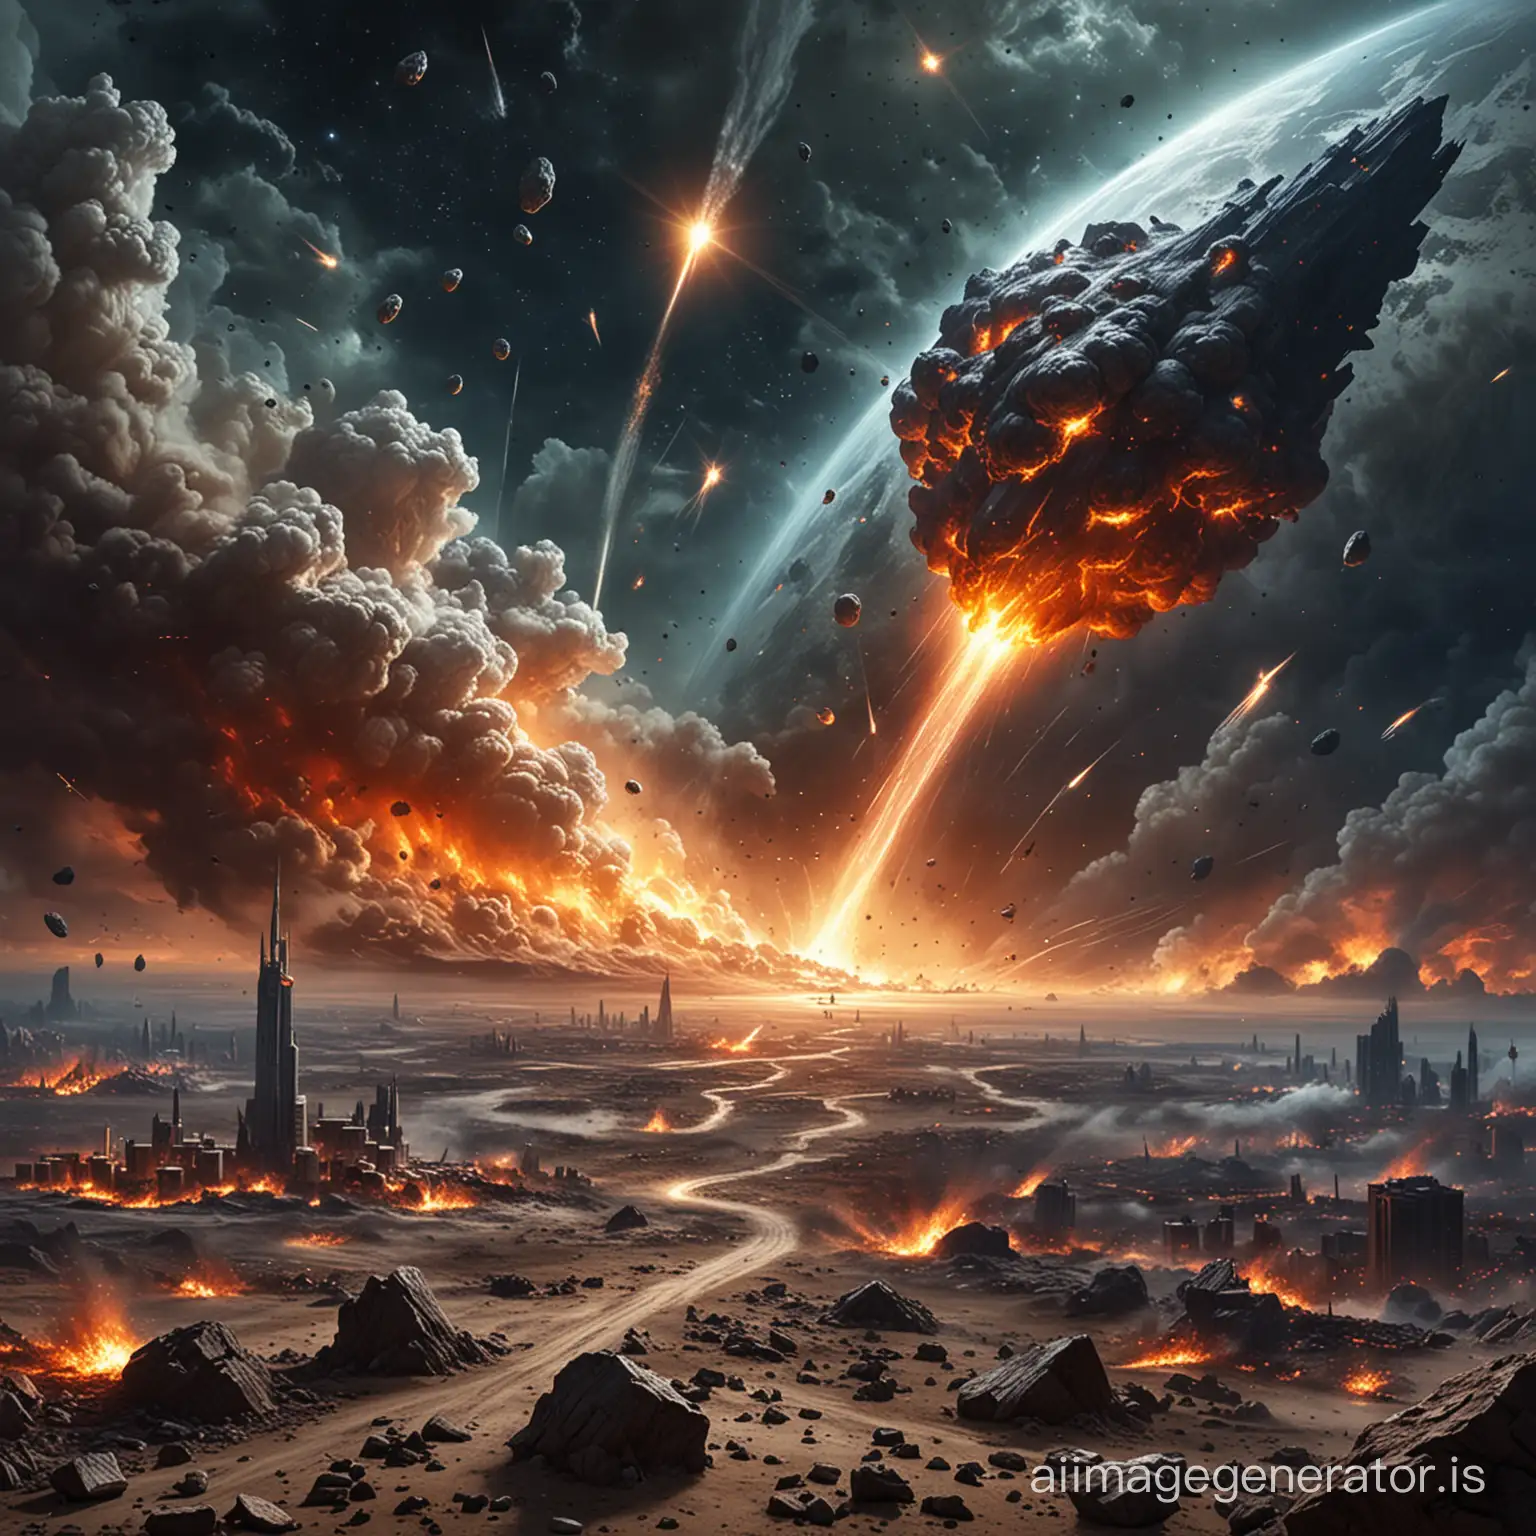 Doomsday, fall of meteors